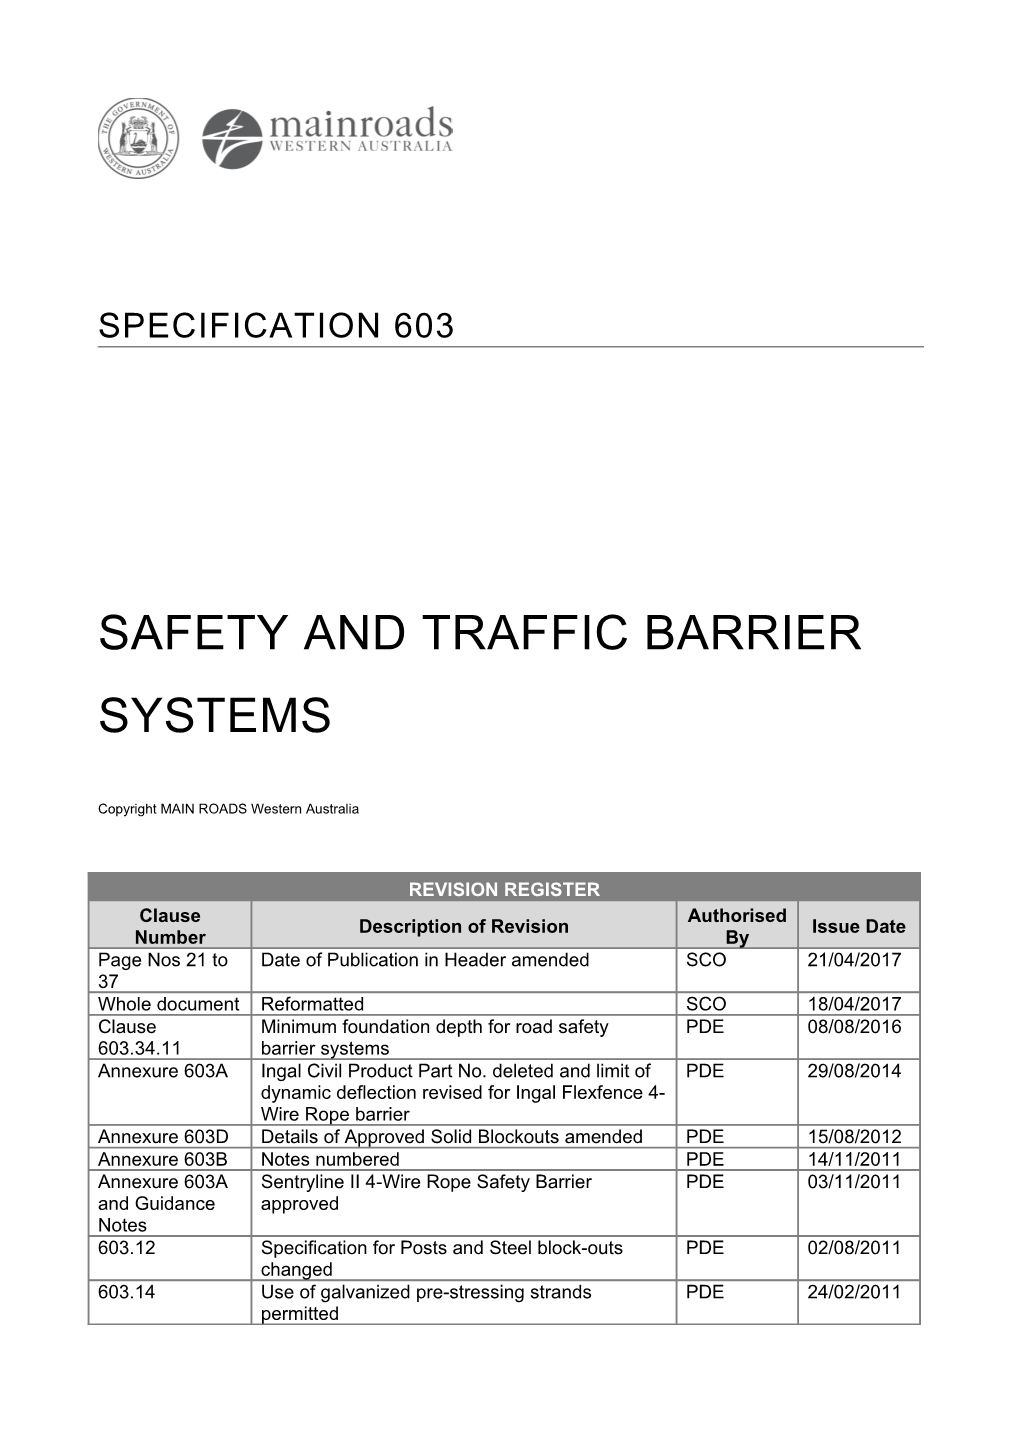 Safety and Traffic Barrier Systems